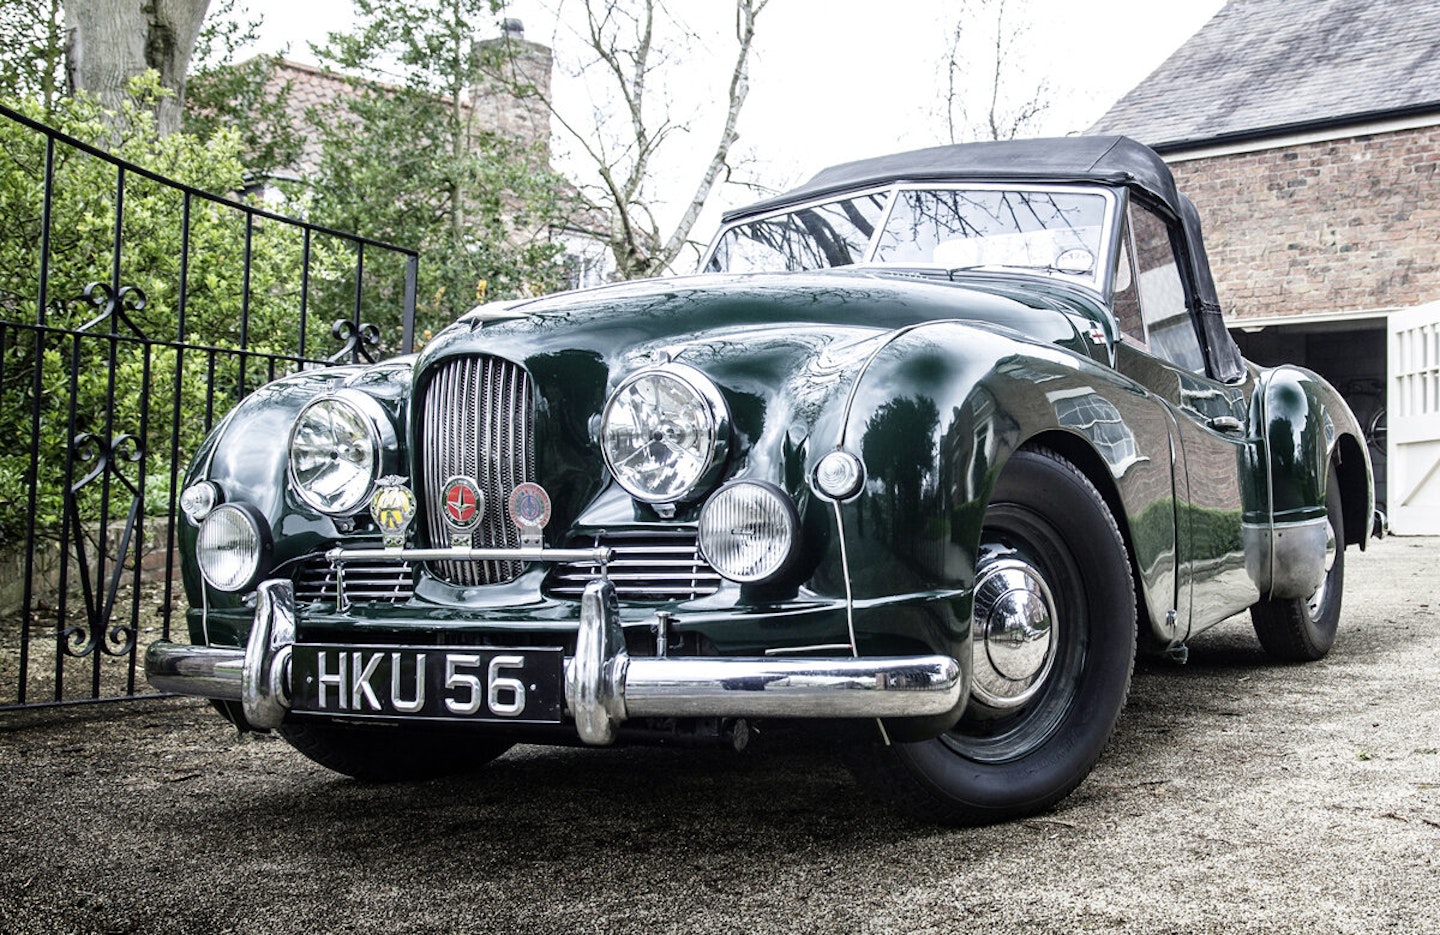 Howard Bryan has a love-hate relationship with this Jowett Jupiter